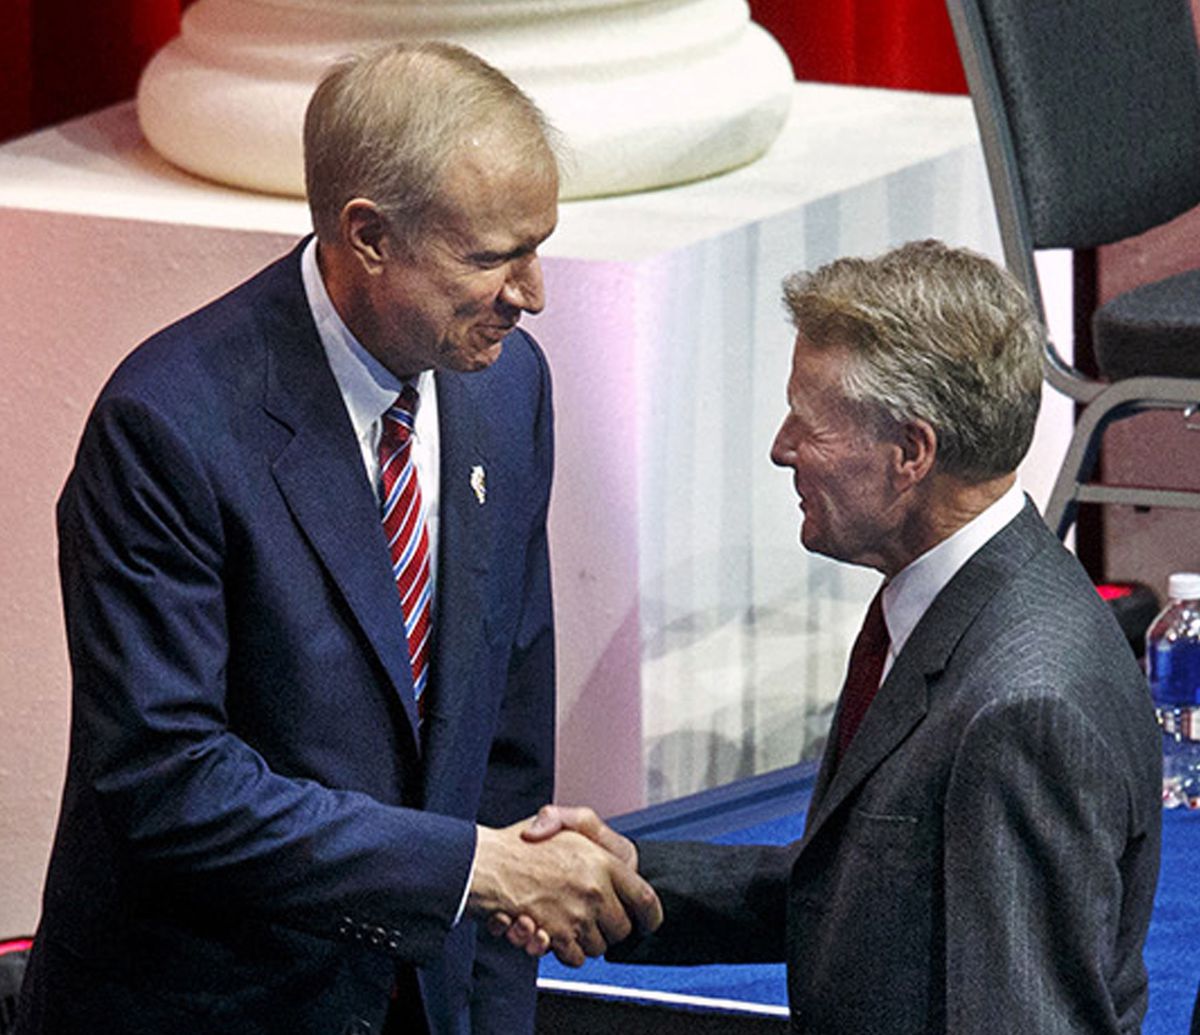 Illinois Gov. Bruce Rauner (left) shakes hands with Illinois House Speaker Michael Madigan after inauguration ceremonies in Springfield on Jan. 12, 2015. | Ted Schurter/The State Journal-Register via AP